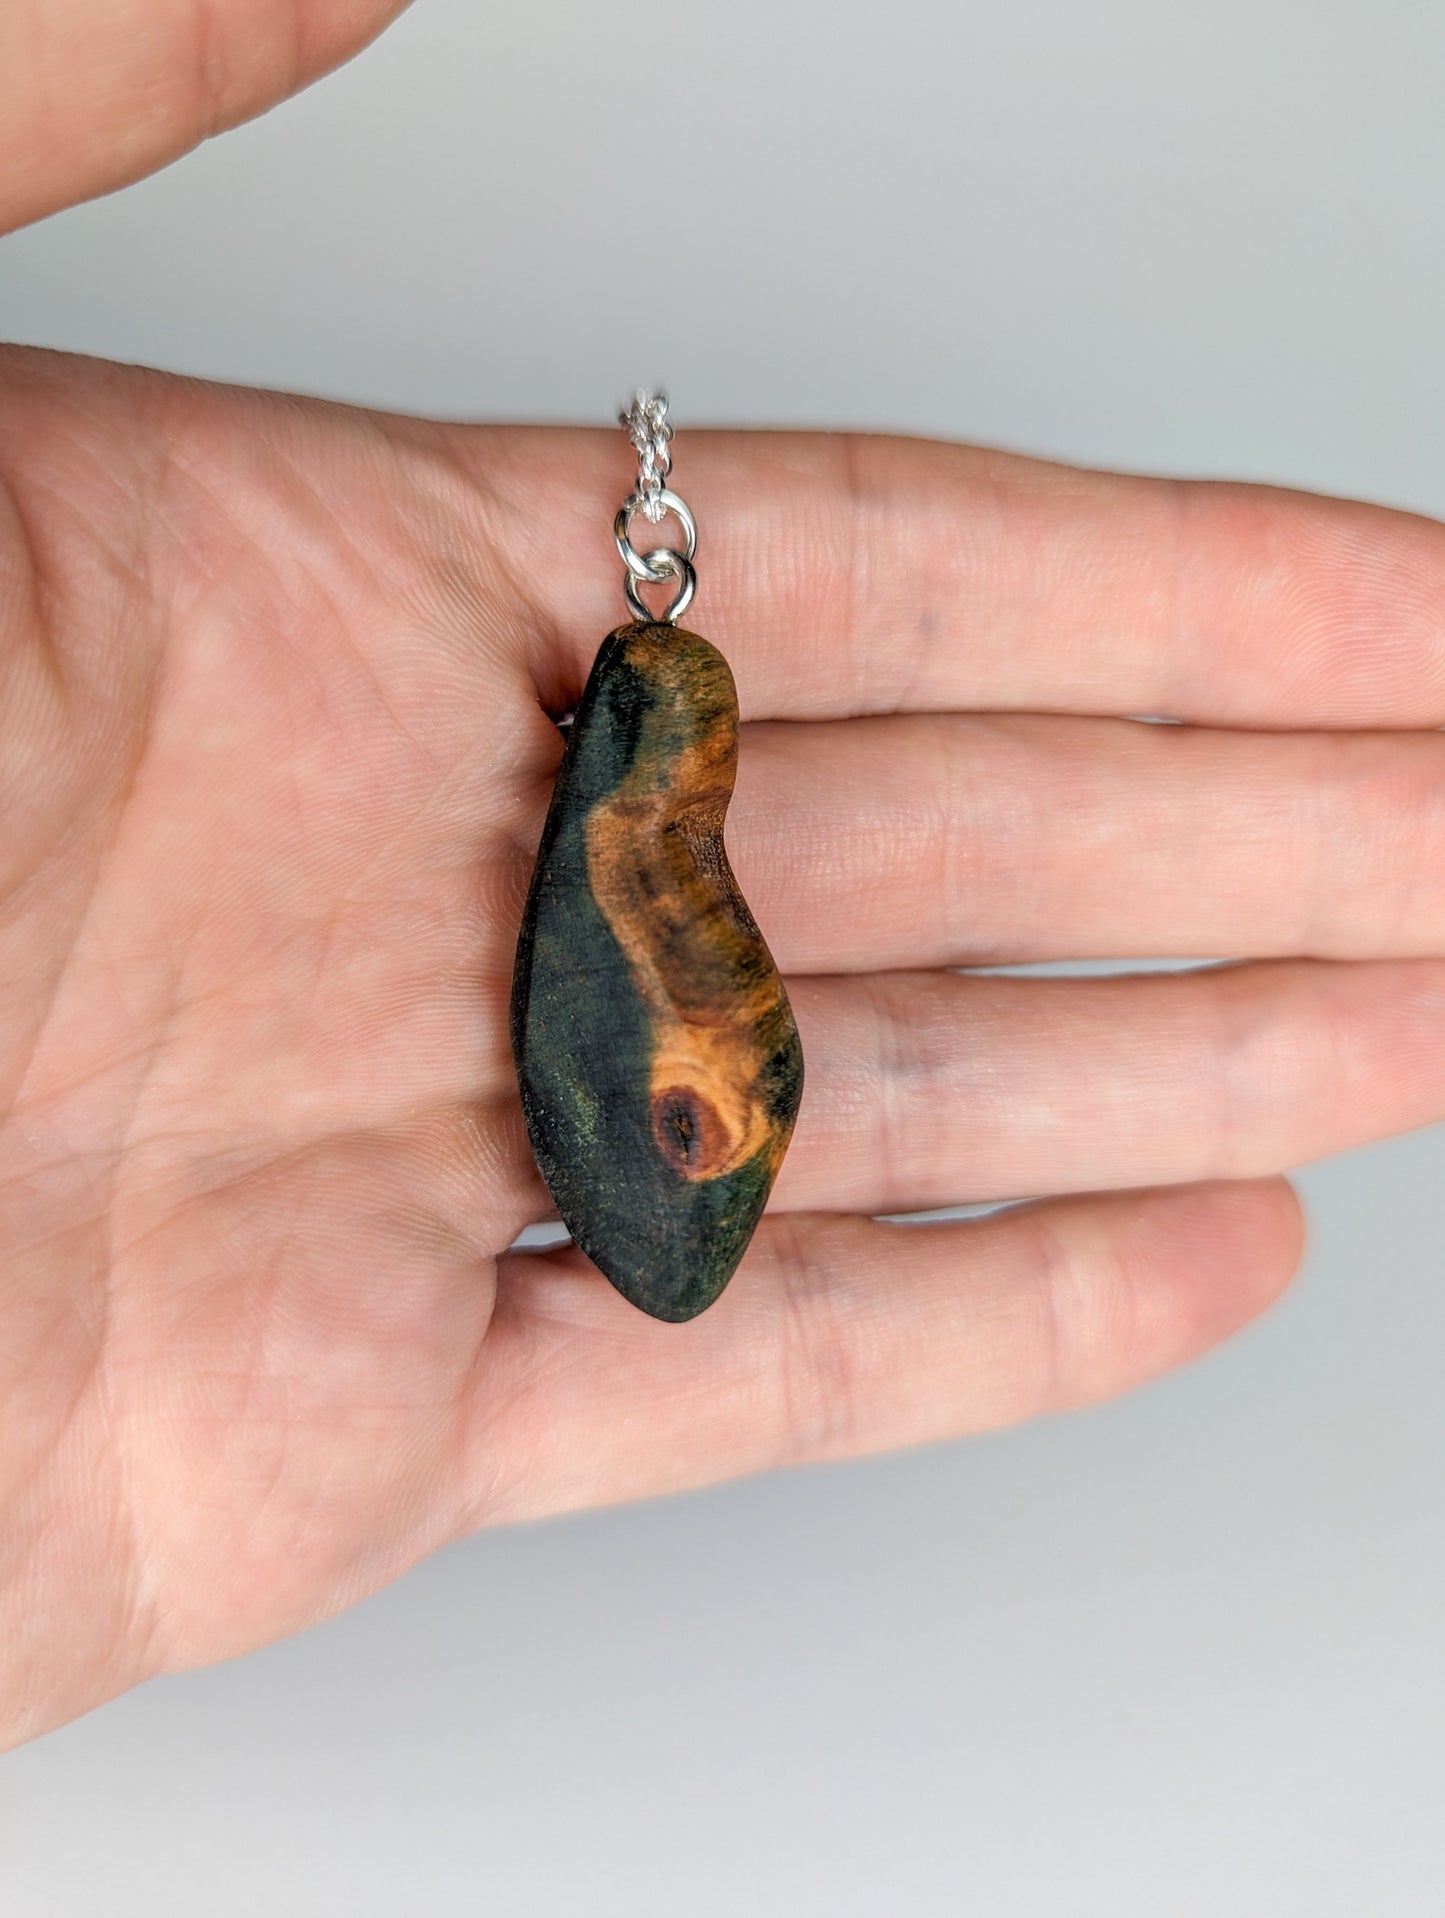 Naturally Fungus-Stained Wooden Pendant | Organic Shape (Gourd?)